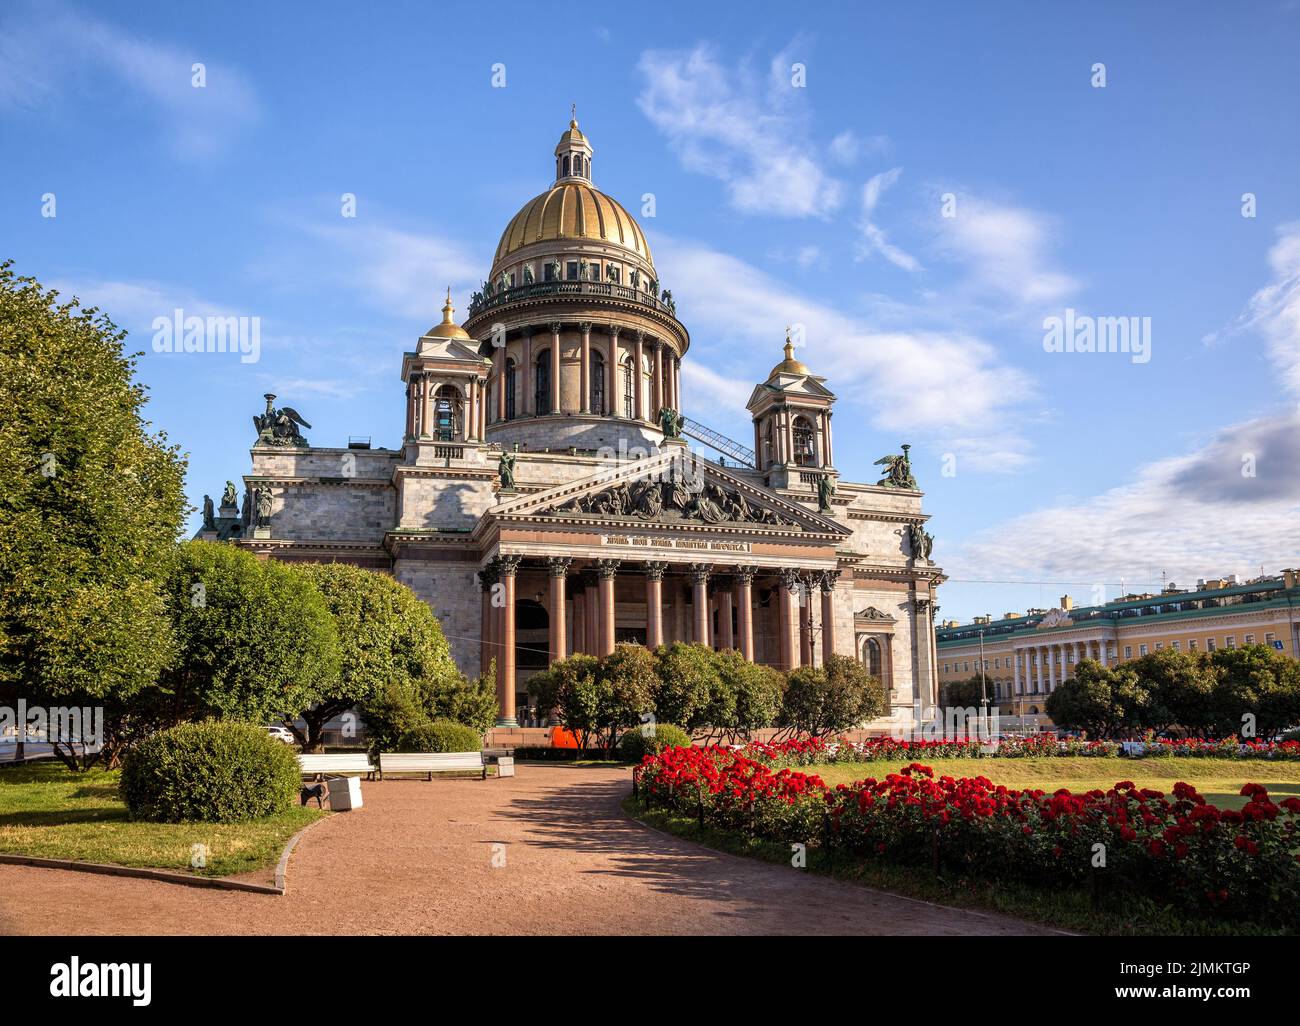 St. Isaac's Cathedral in St. Petersburg. Square with flowers in front of the cathedral Stock Photo